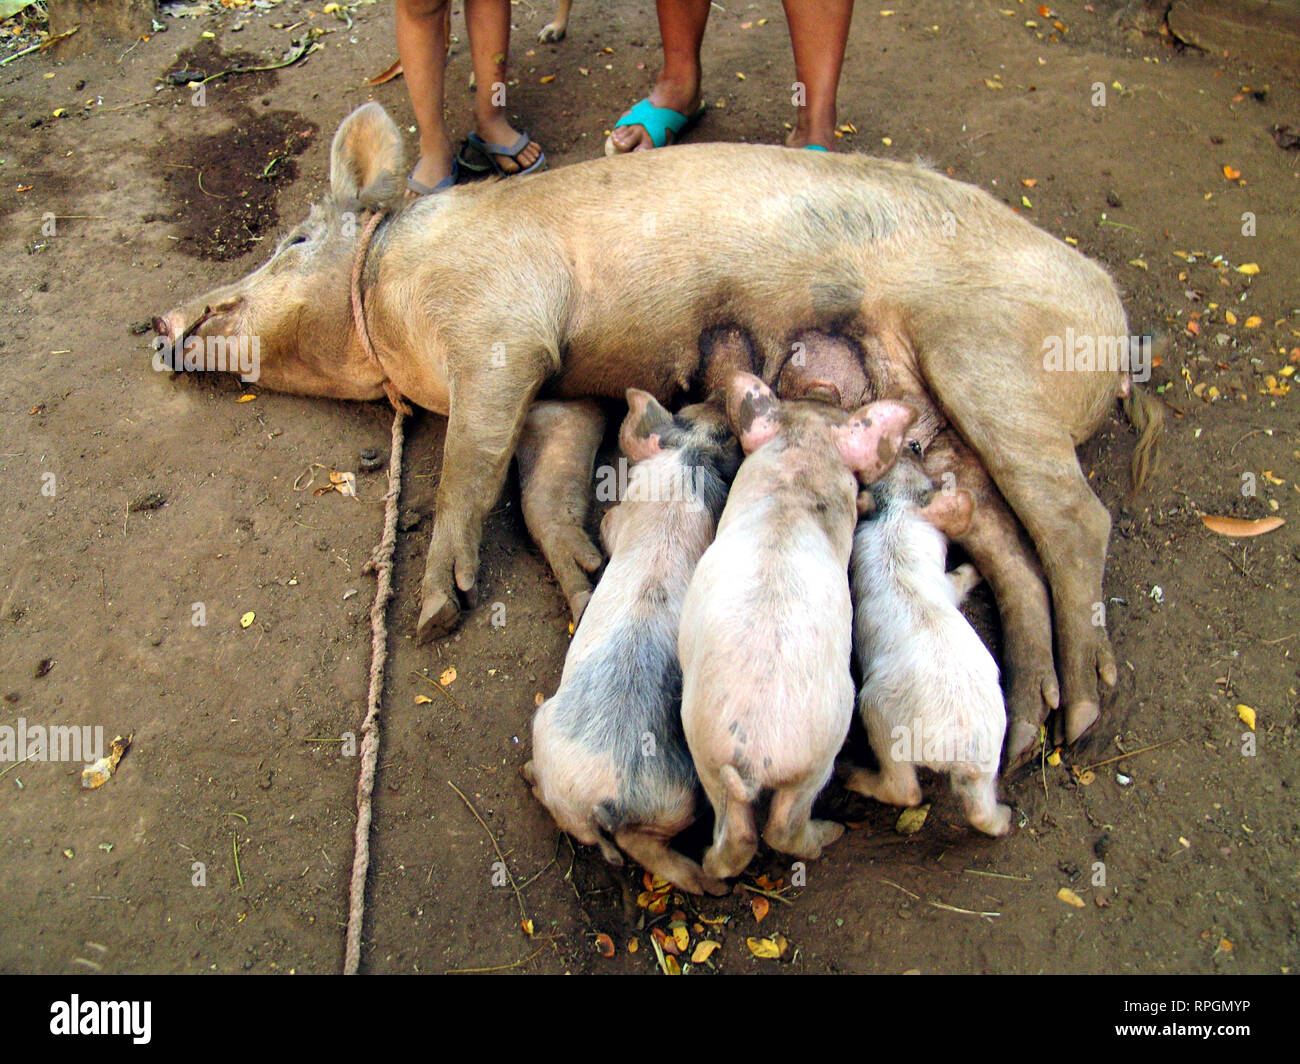 EL SALVADOR  piglets feeding from their mother pig San Francsisco Javier Stock Photo